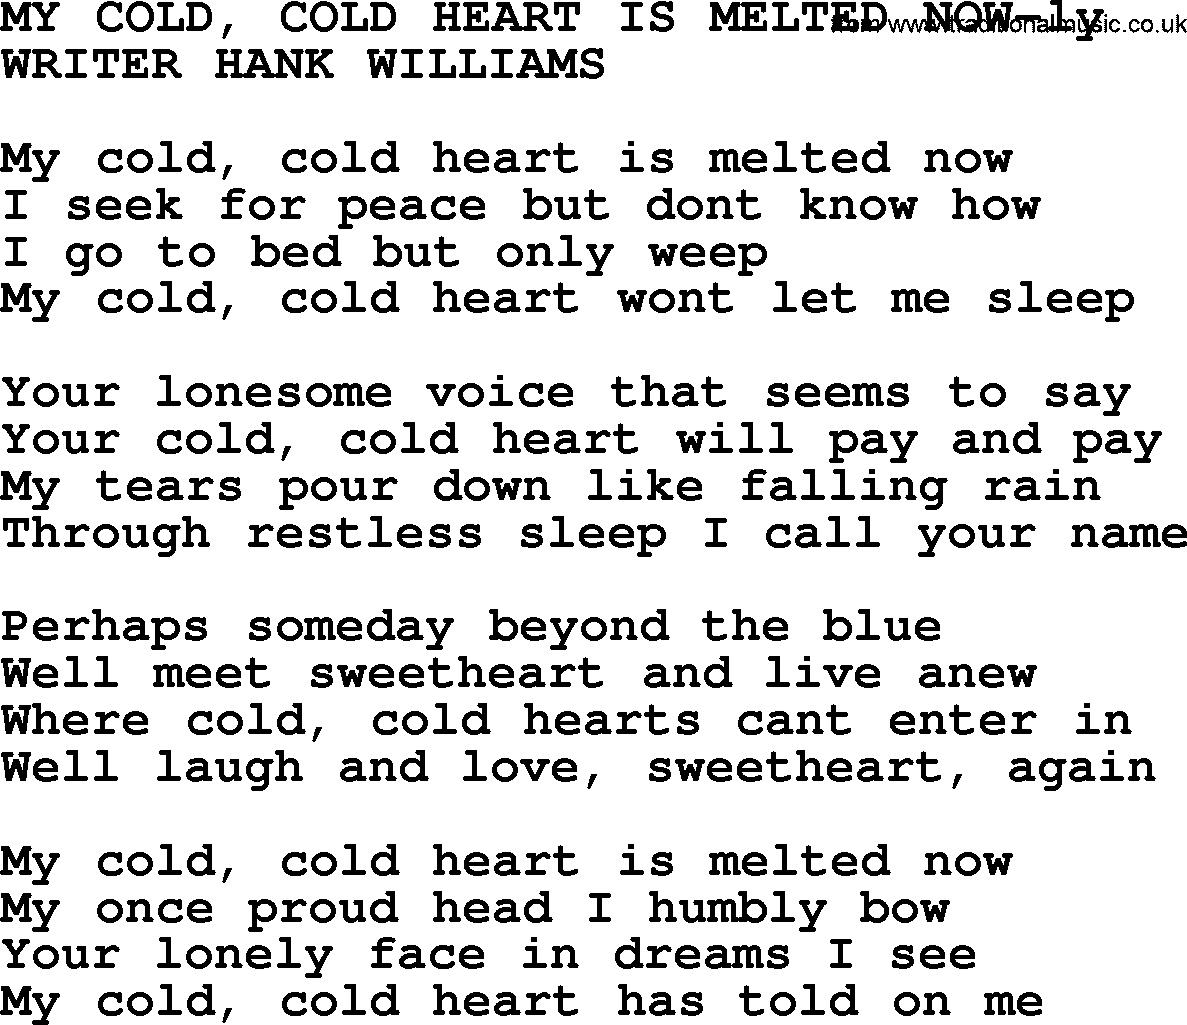 Hank Williams song My Cold, Cold Heart Is Melted Now, lyrics